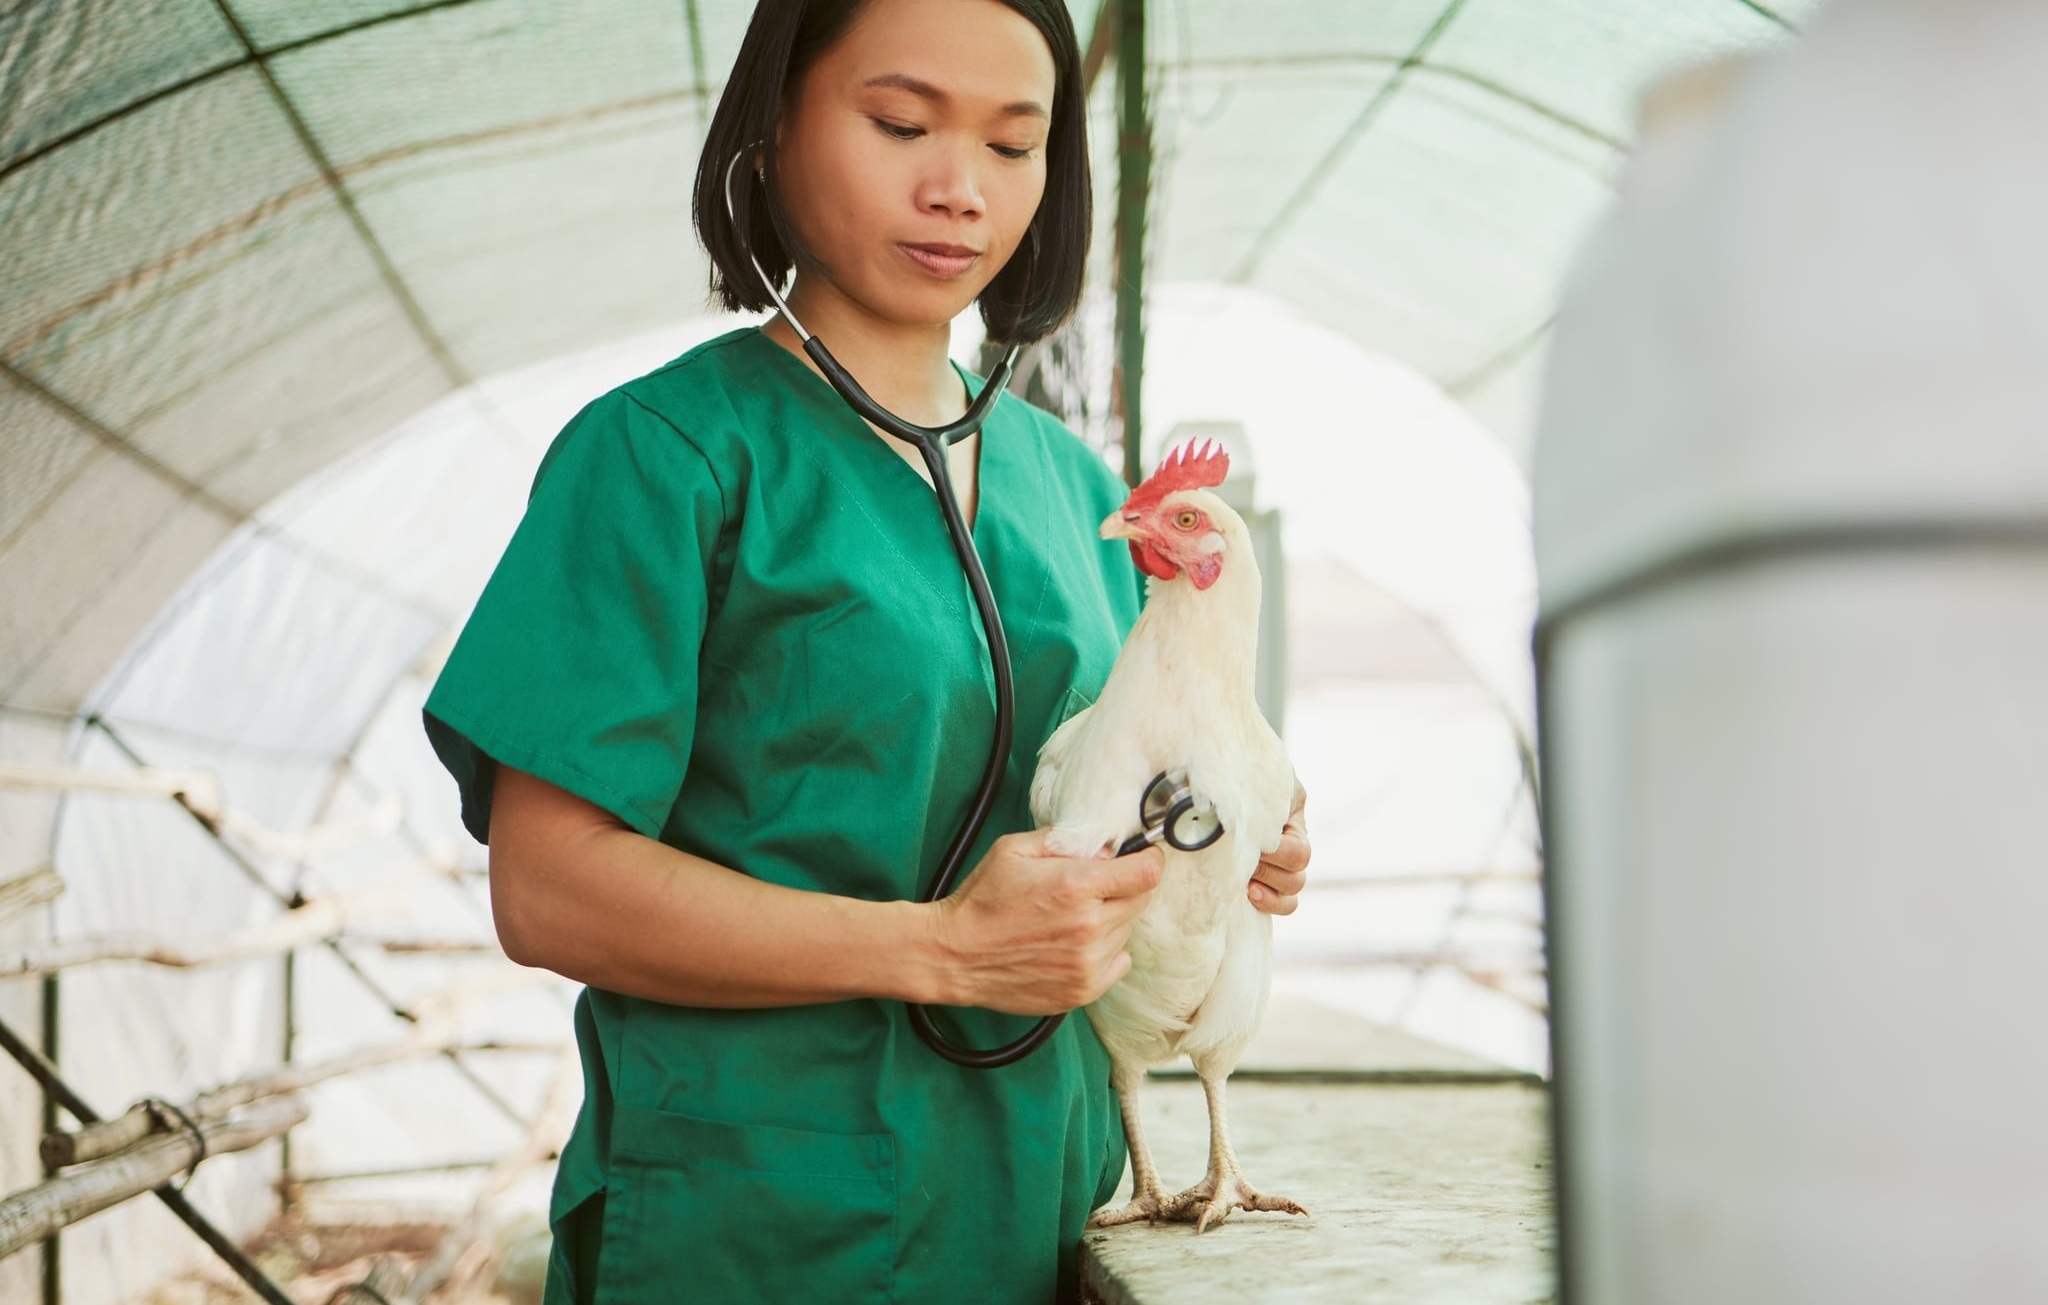 Young Asian woman in green medical scrubs standing indoors using a stethoscope to examine a chicken standing on a table